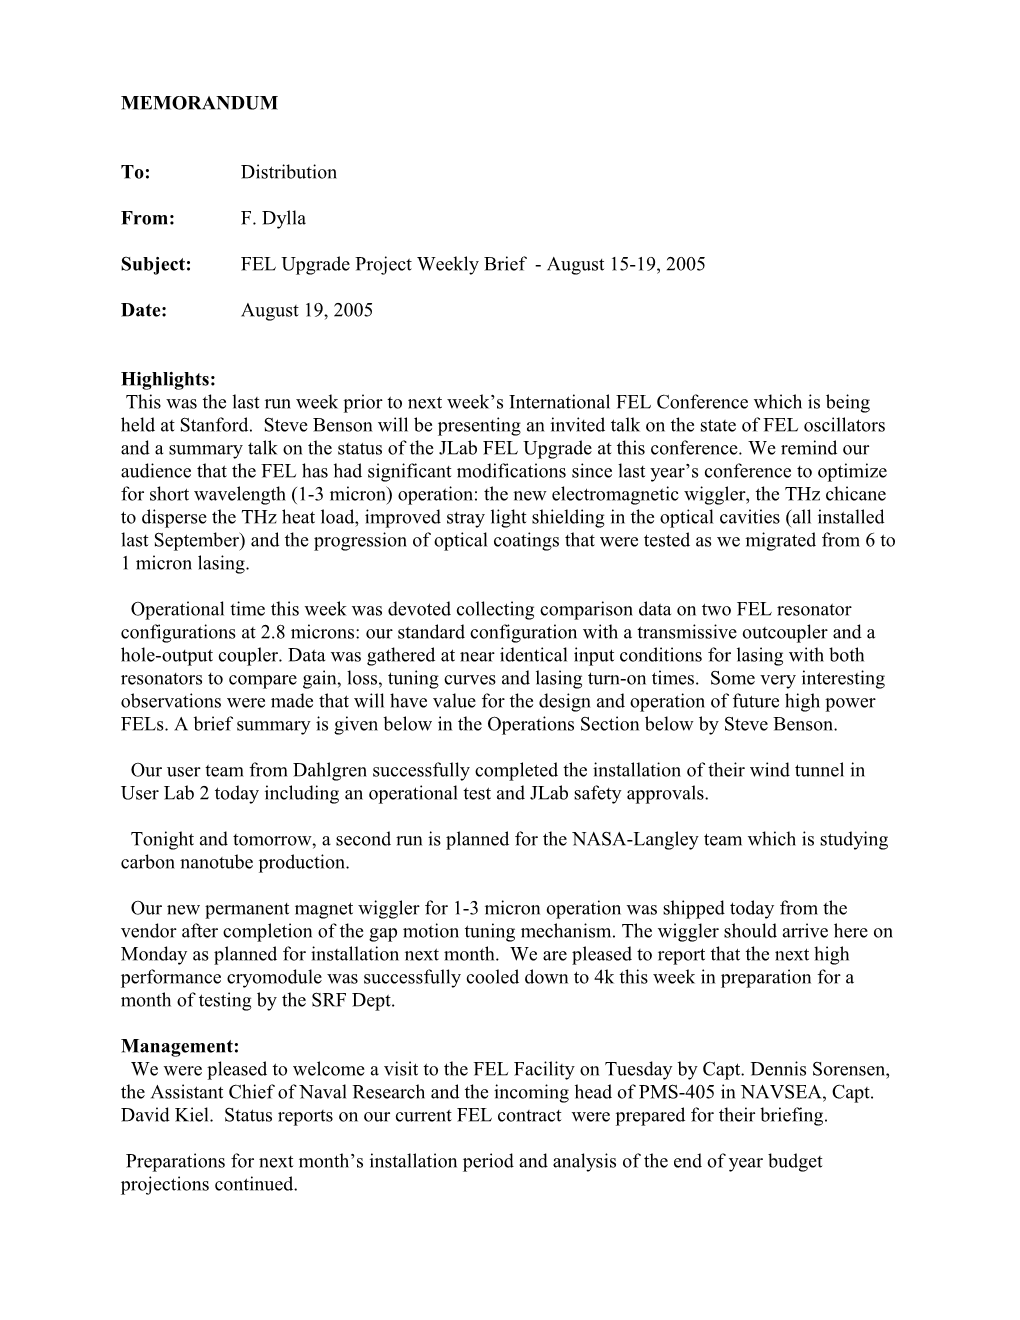 Subject: FEL Upgrade Project Weekly Brief - August 15-19, 2005